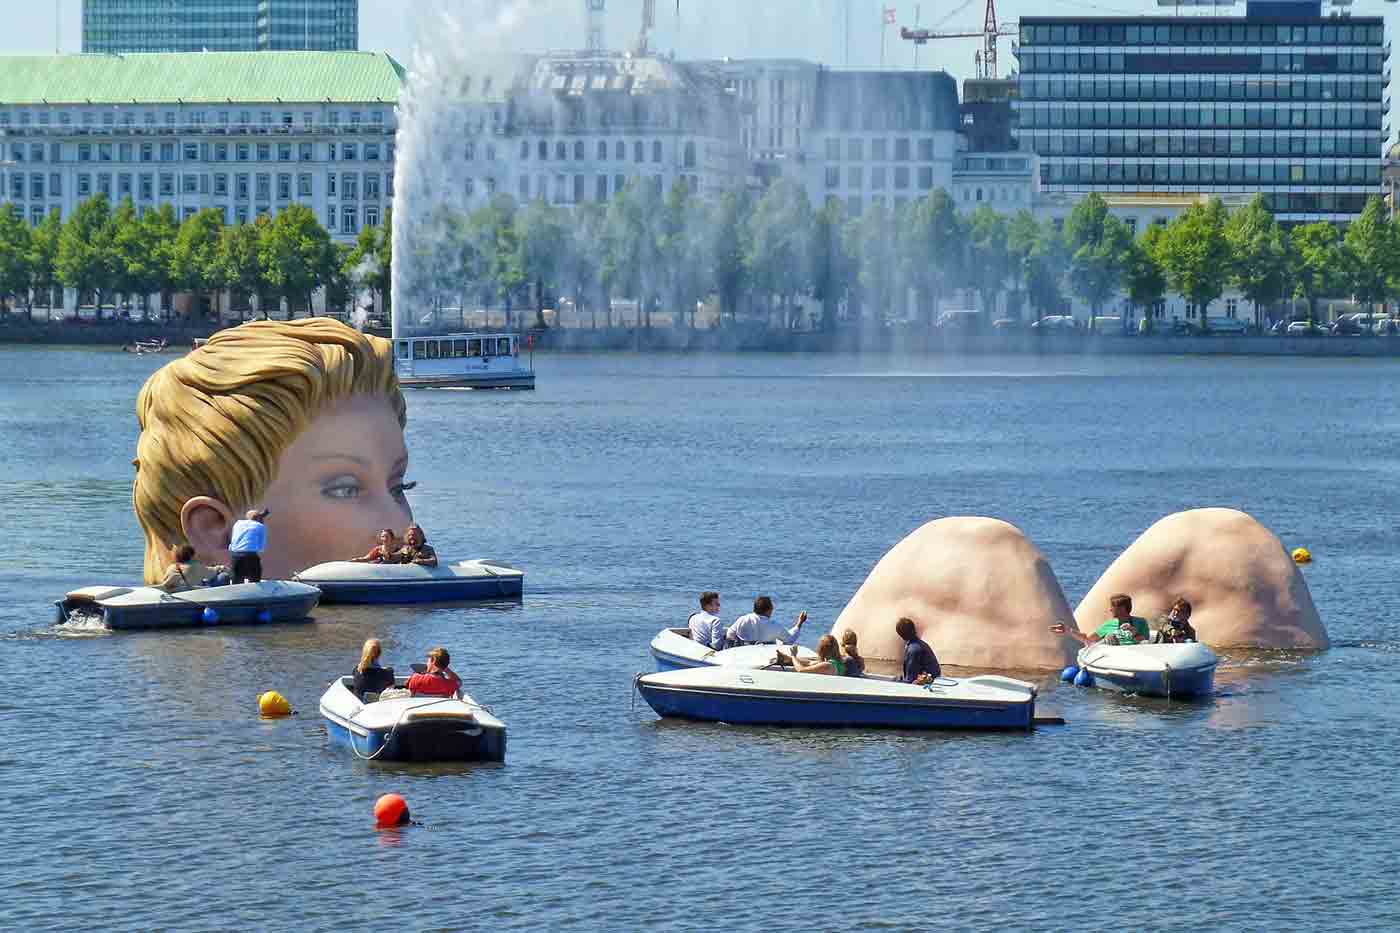 The Alster Lakes